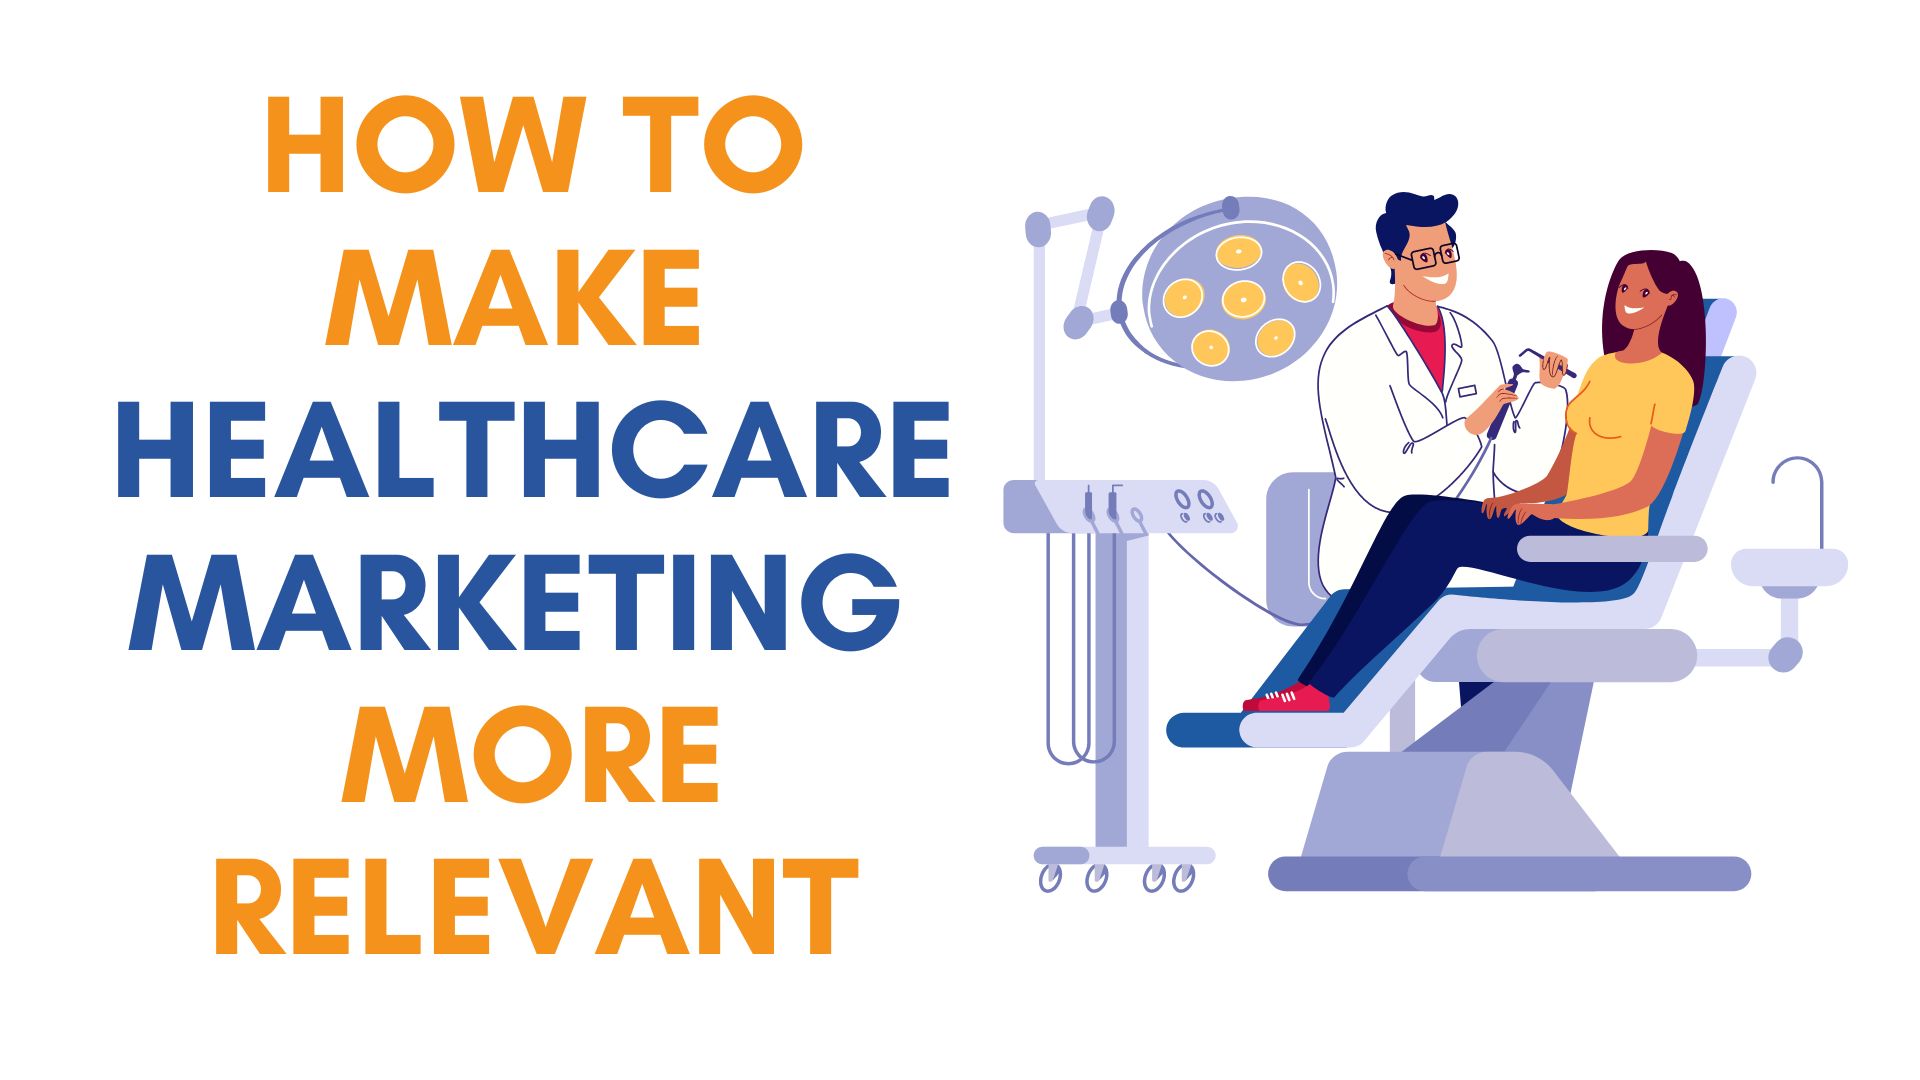 How to Make Healthcare Marketing More Relevant